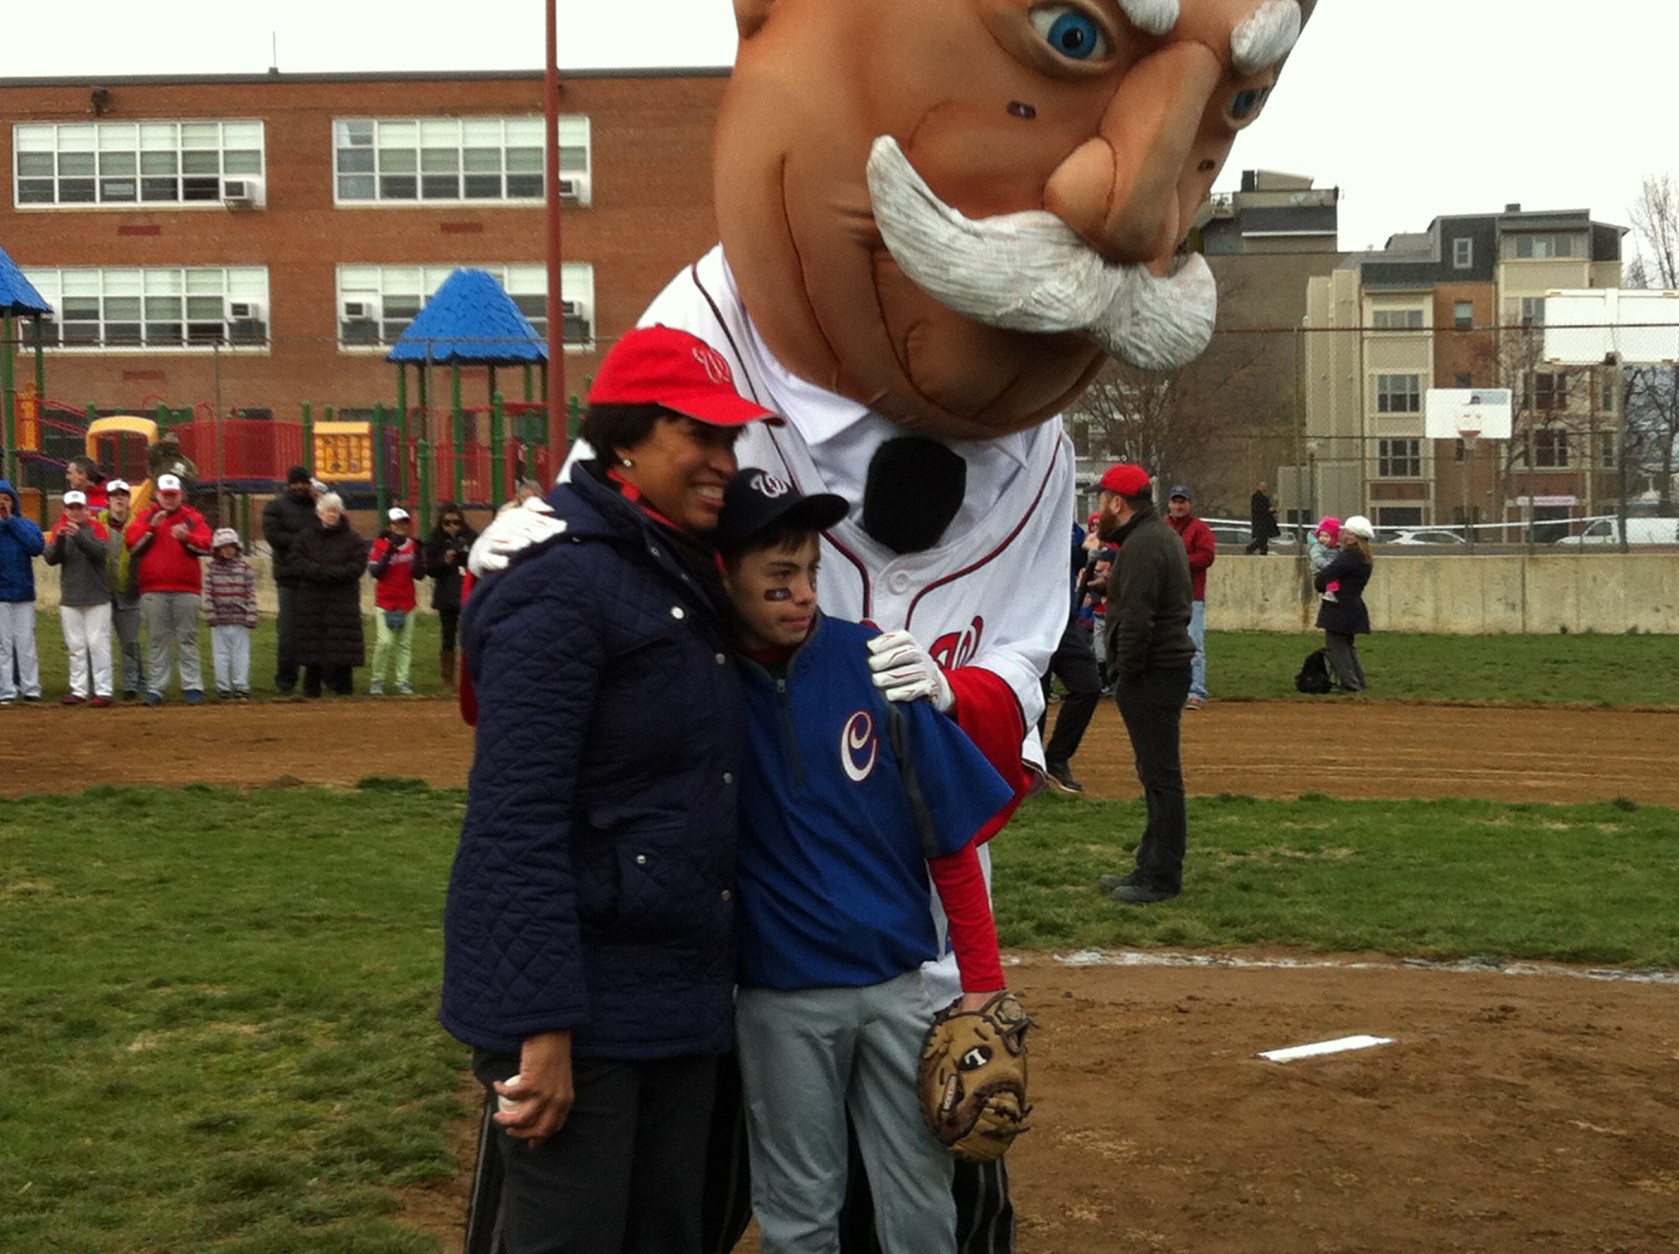 Muriel Bowser poses with a Little League baseball member and “Big Chief Taft” after the first pitch.